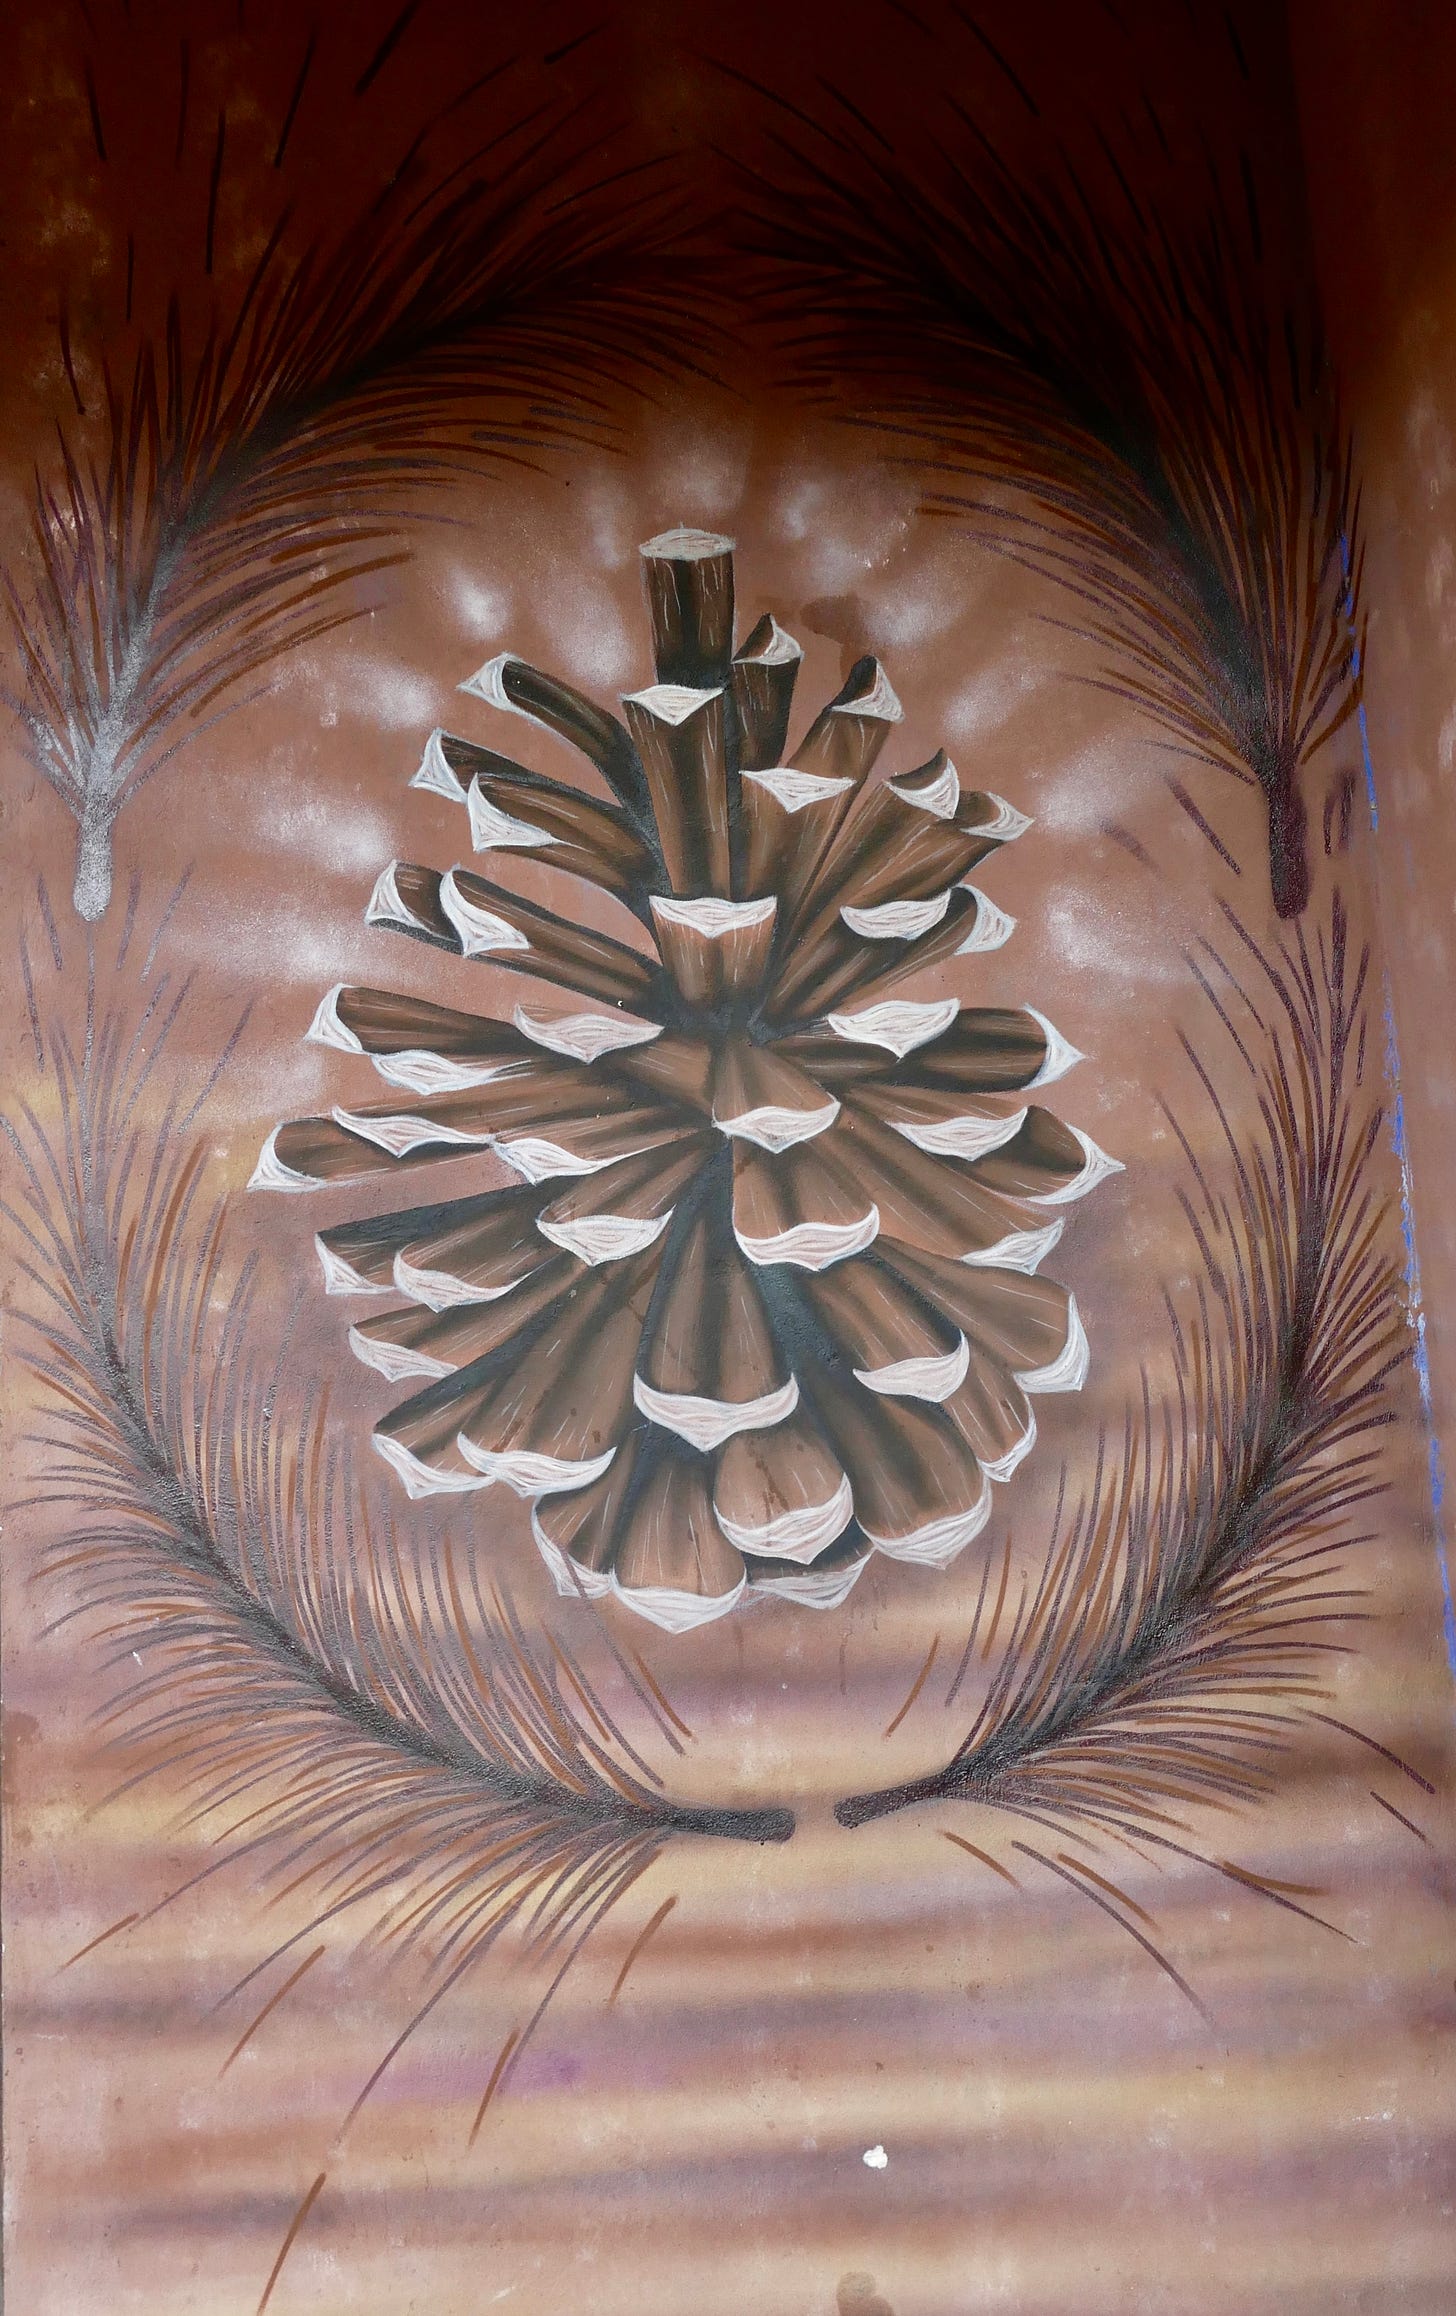 Pinecone detail from a mural in Cherán